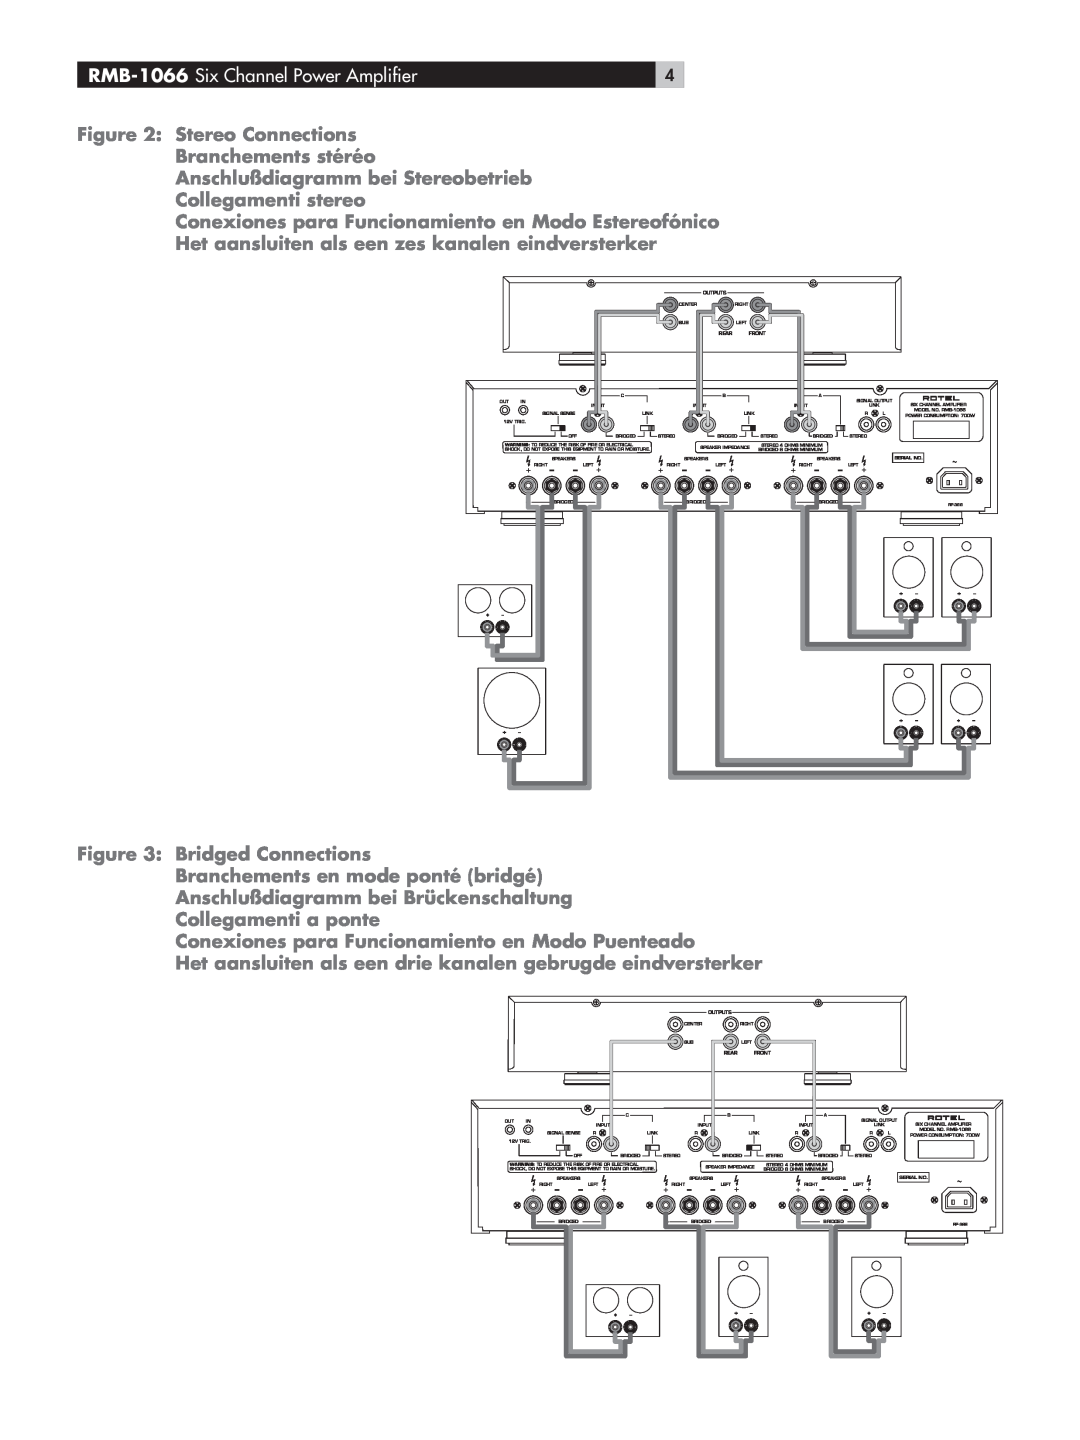 Rotel RMB-1066 Six Channel Power Amplifier, Stereo Connections Branchements stéréo, Anschlußdiagramm bei Stereobetrieb 